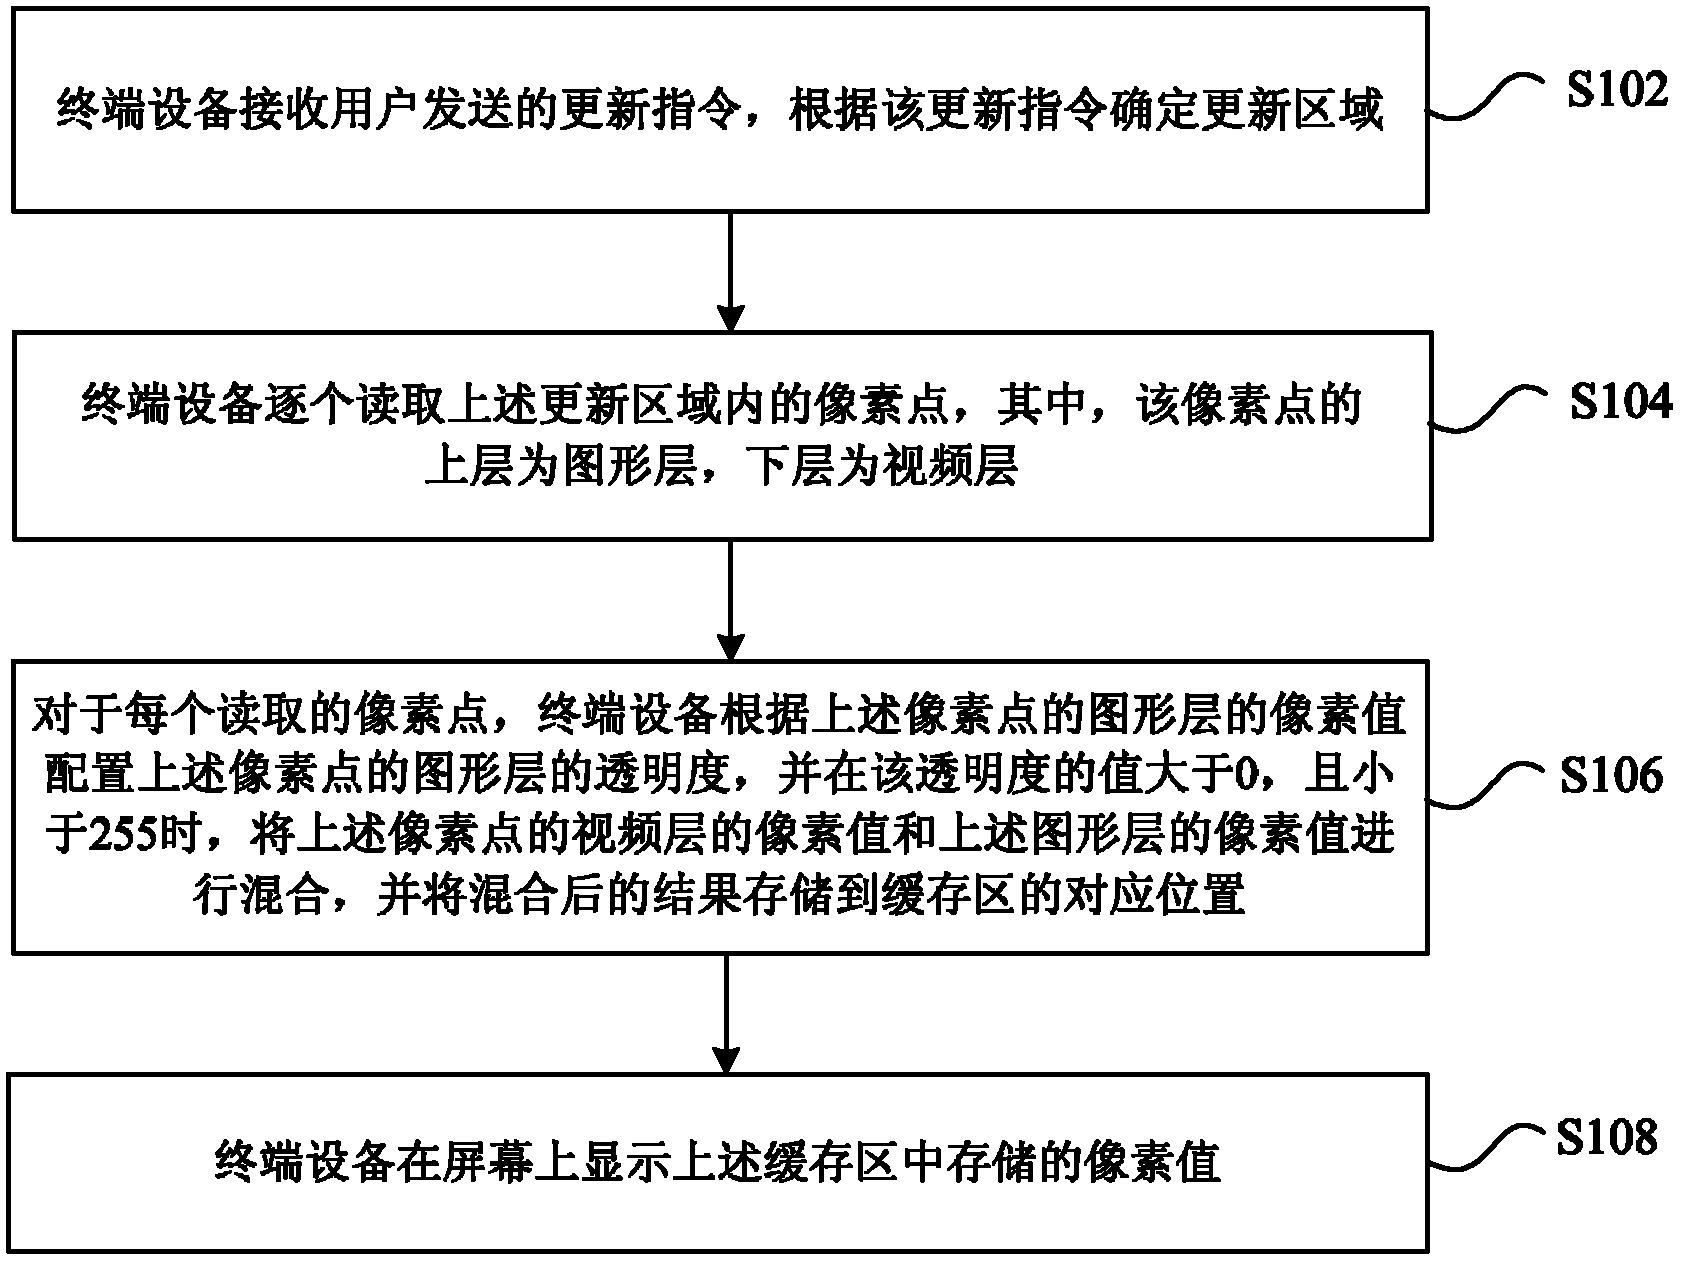 Screen content display method and screen content display device